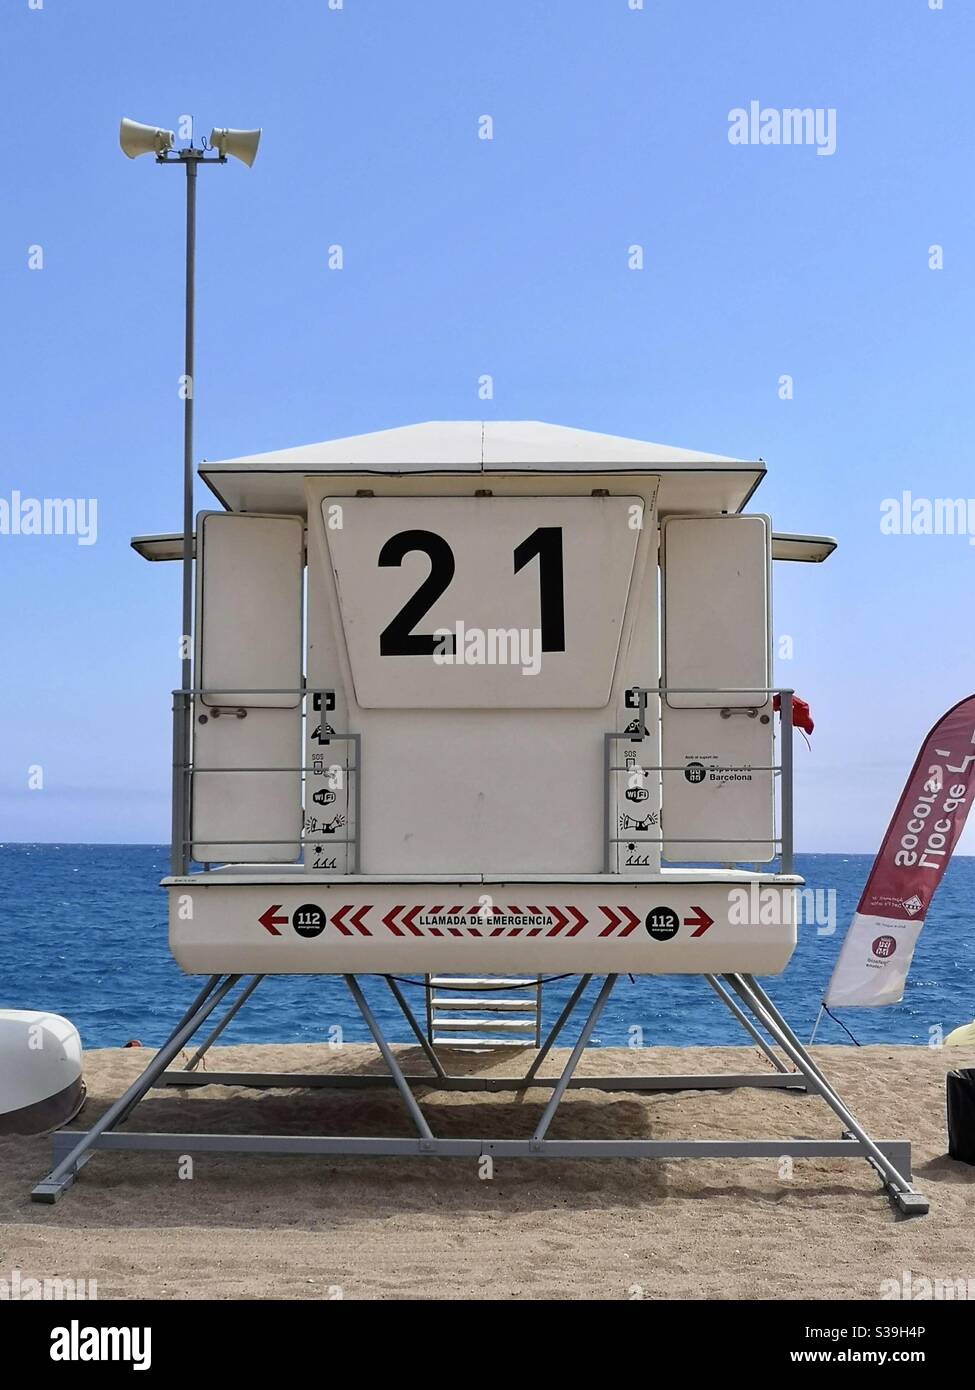 Lifeguard rescue hut on Spanish beach, number 21 Stock Photo